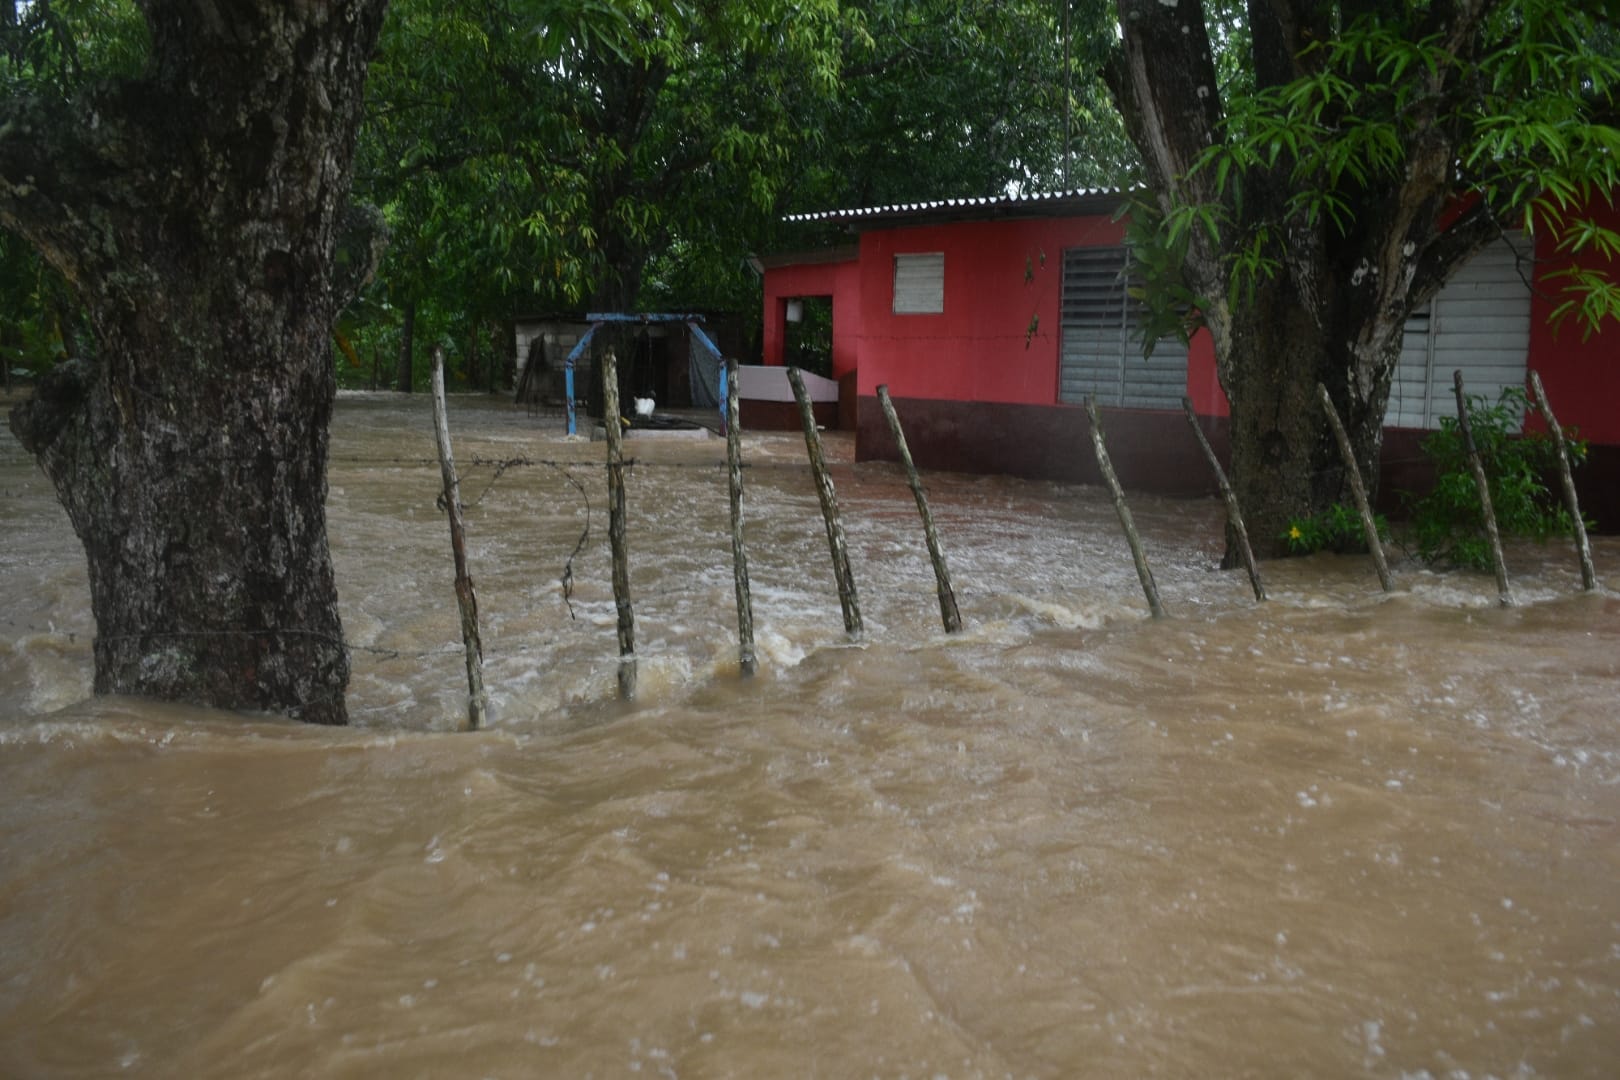 The heavy rains caused damages in houses, agriculture and other facilities